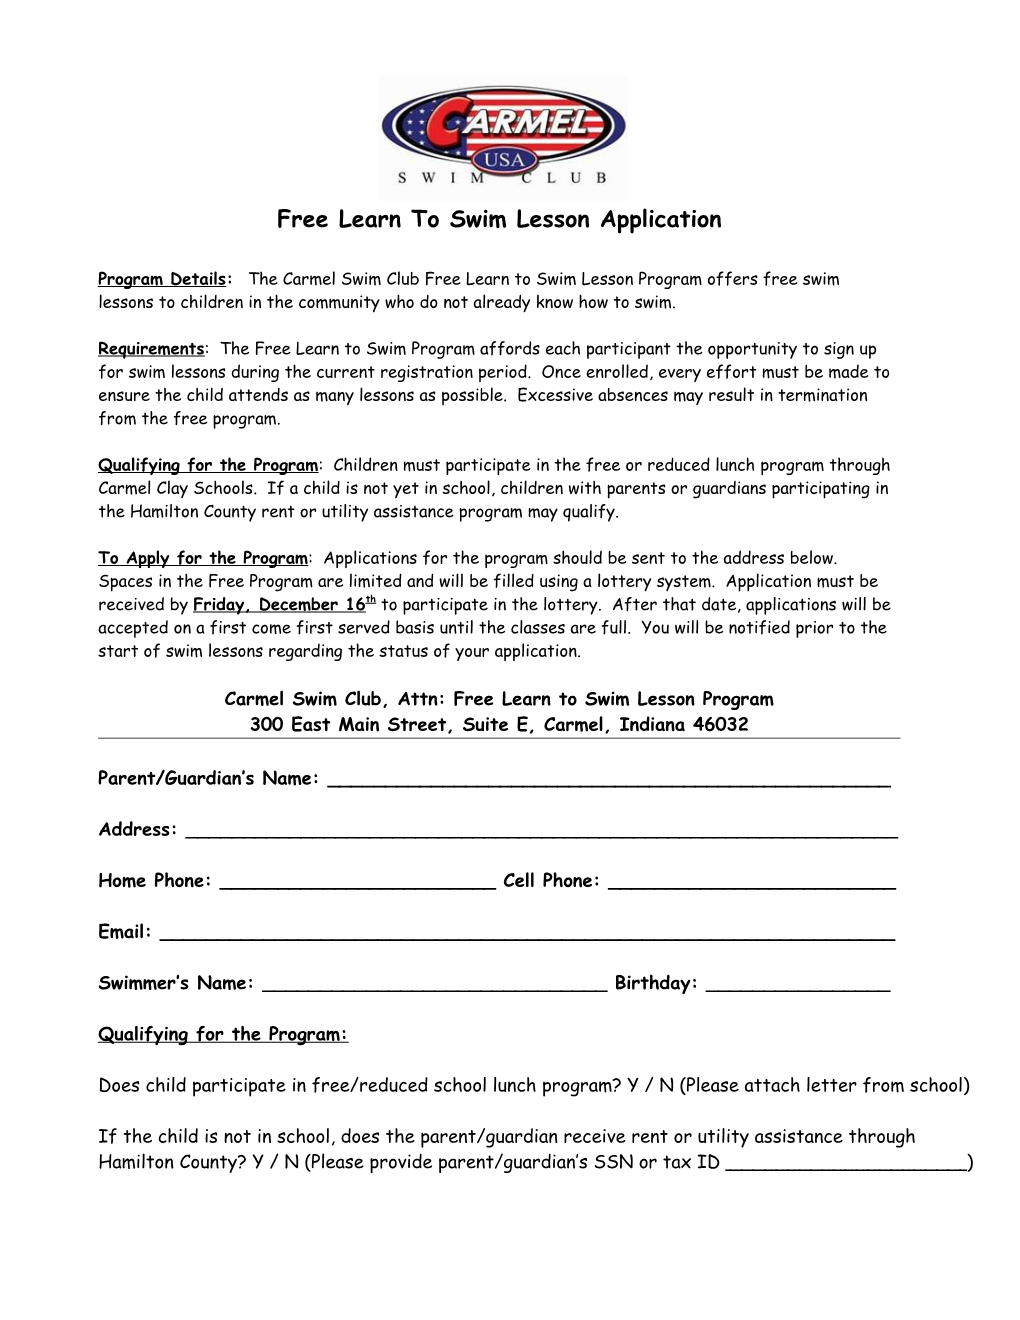 Free Learn to Swim Lesson Application